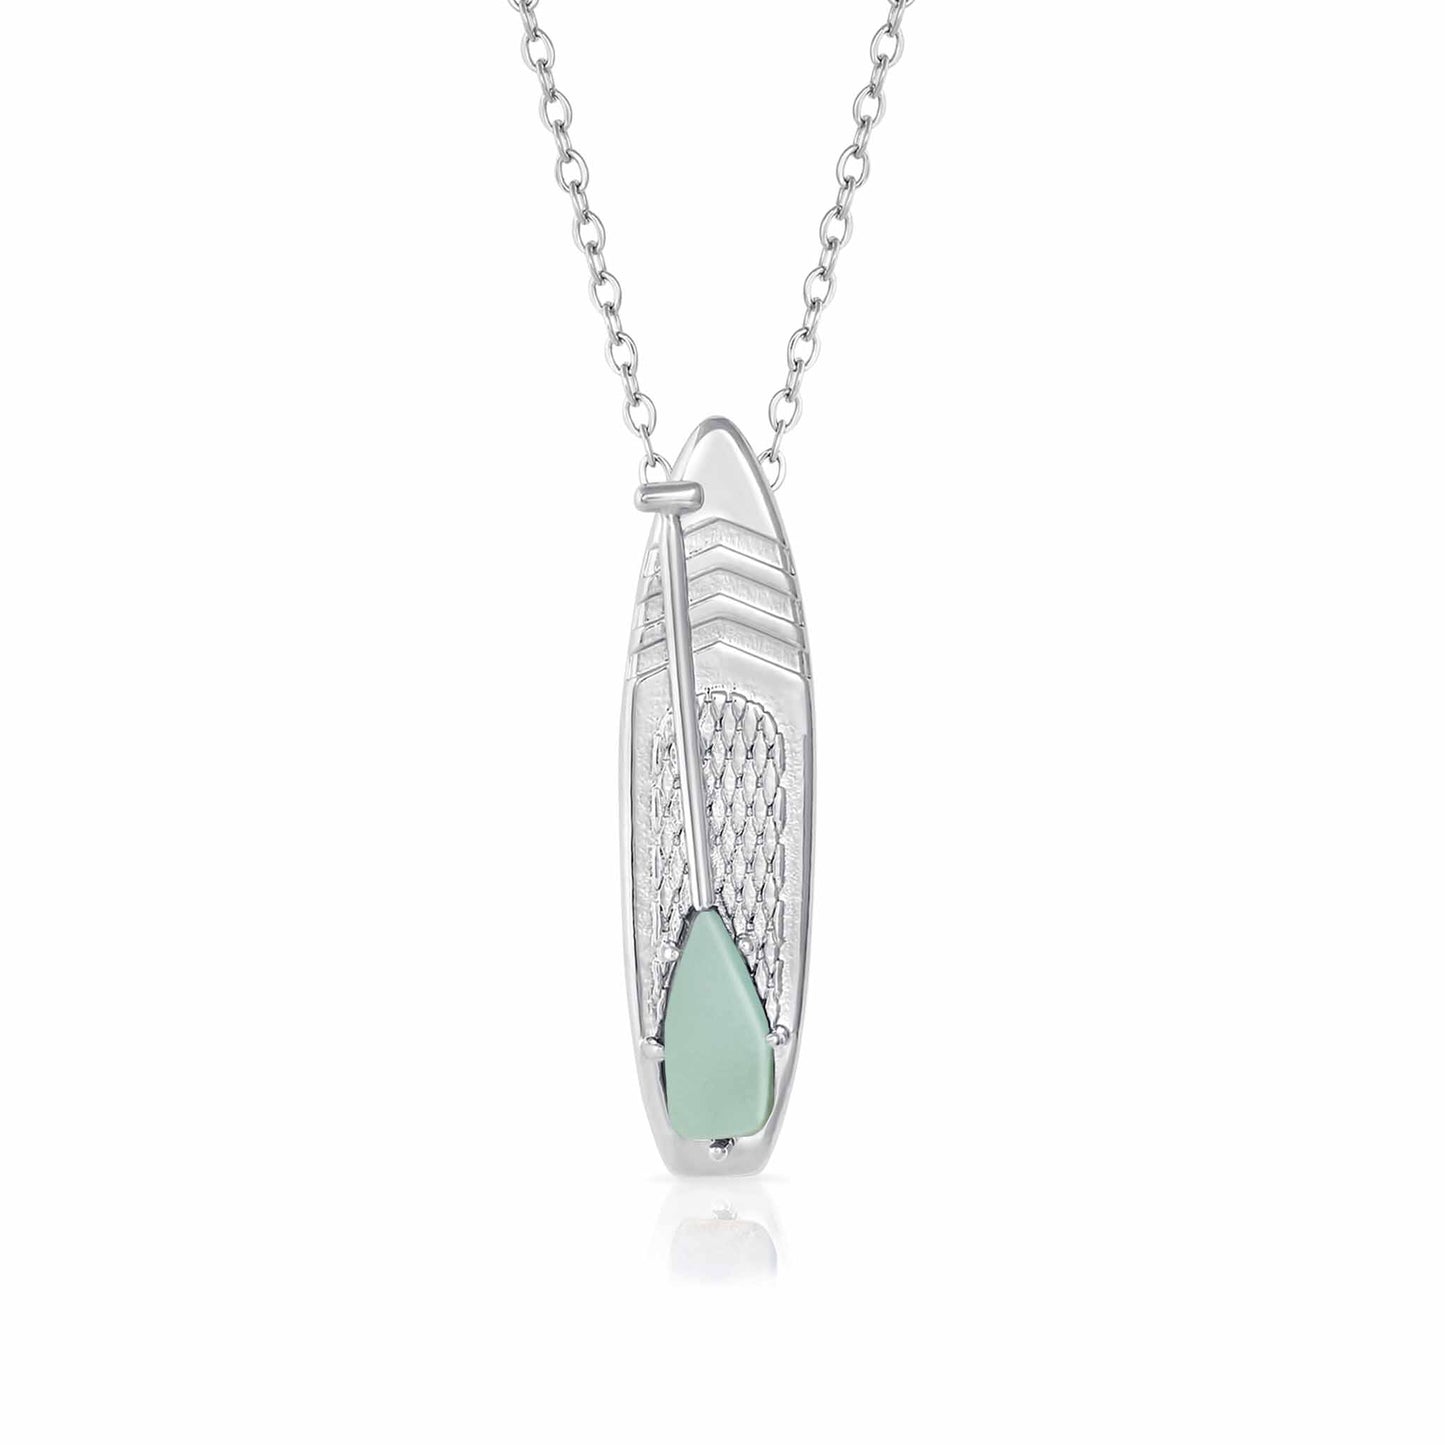 Looking for places to buy or rent a paddle board? This stand up paddle board pendant will be the best and highest performance SUP you'll ever find. Take your paddle board with you, even when you're not surfing, racing or touring. Shop March's birthstone SUP jewelry online or at a surf shop near you.